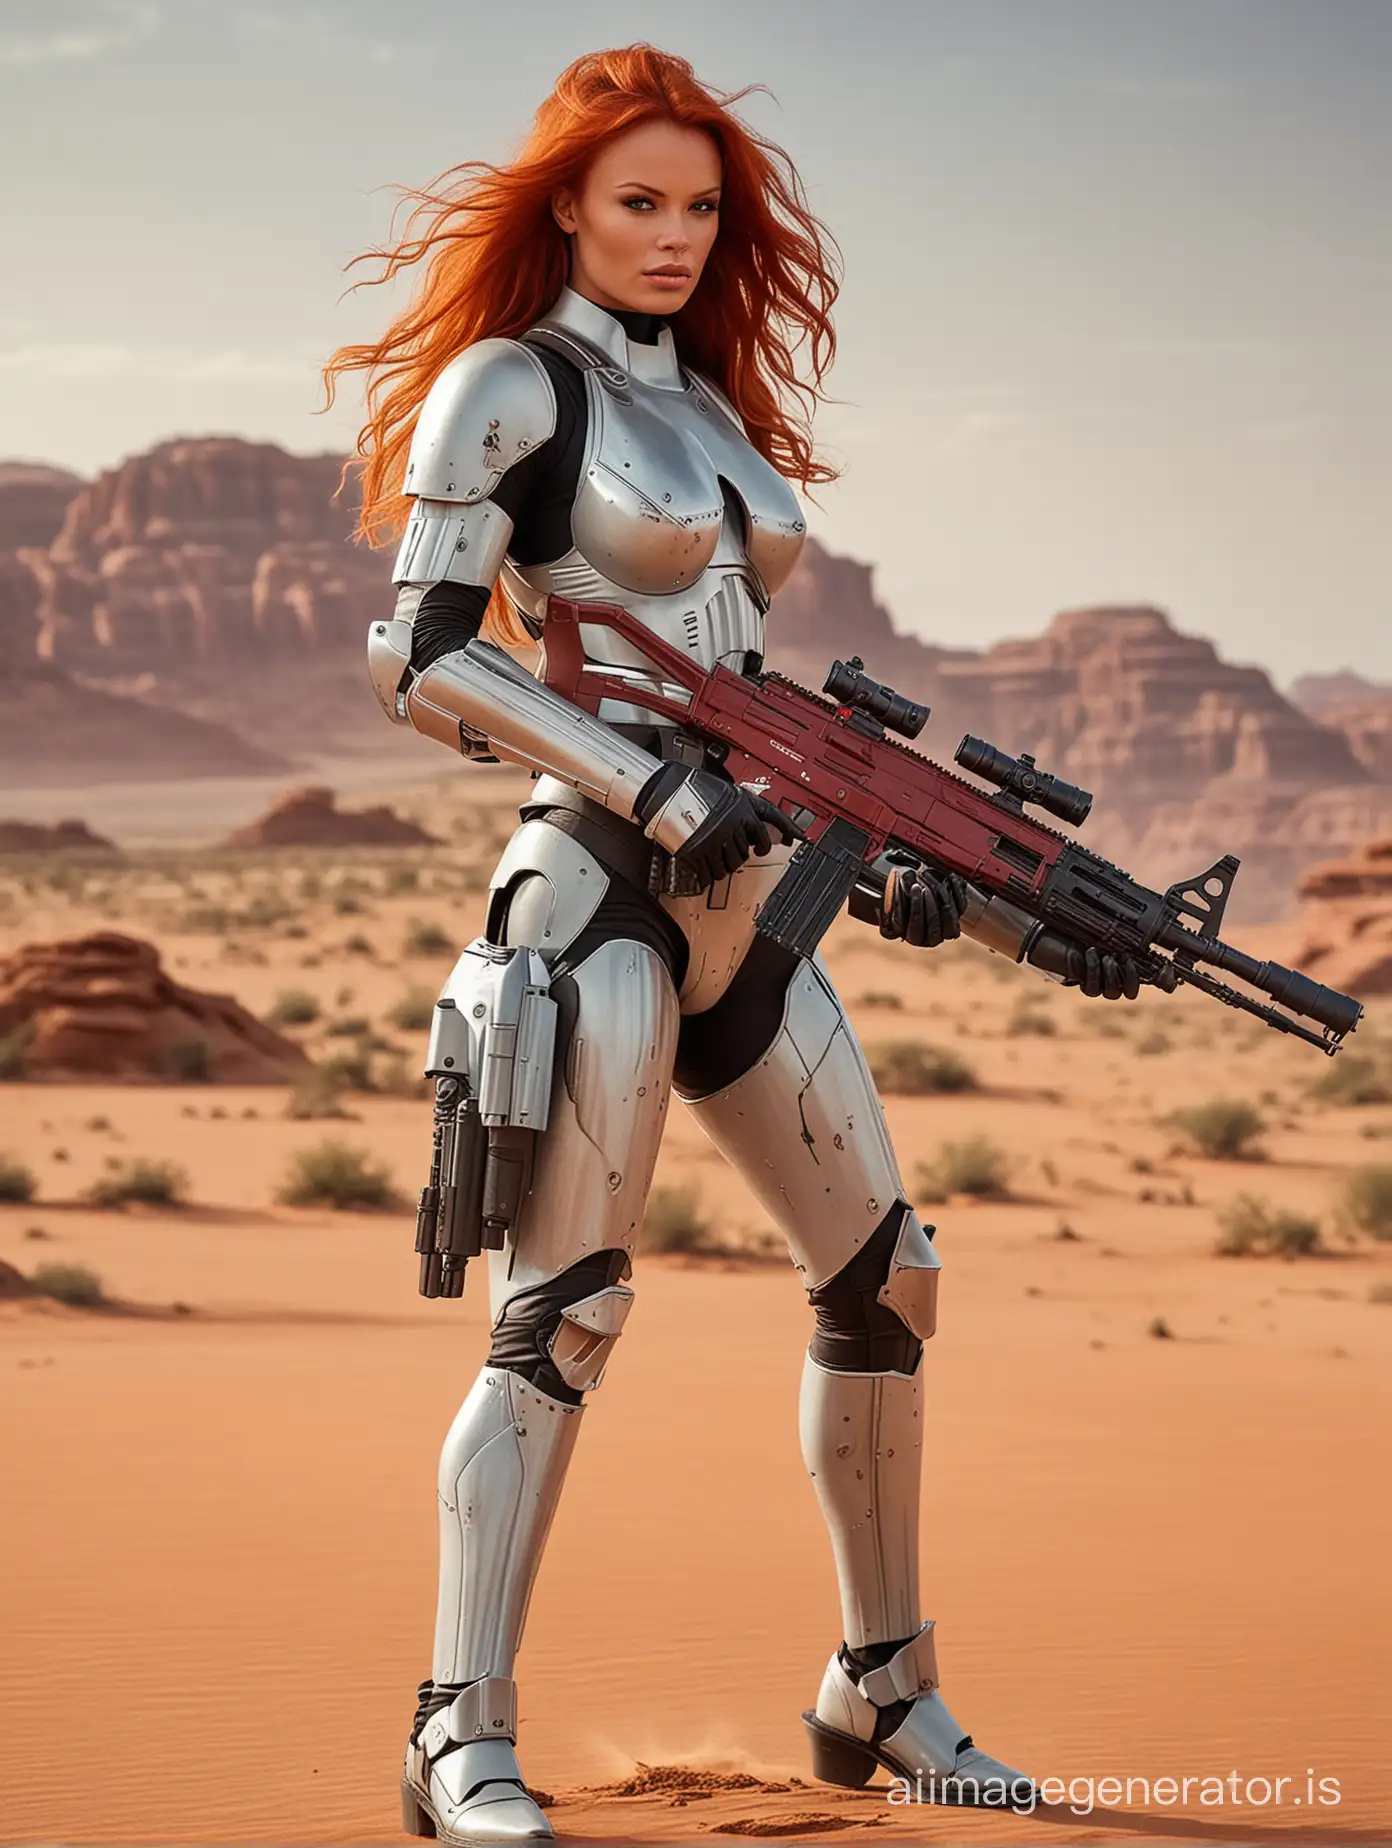 Sexy-Woman-in-Stormtrooper-Armor-Riding-Monster-in-Star-Wars-Desert